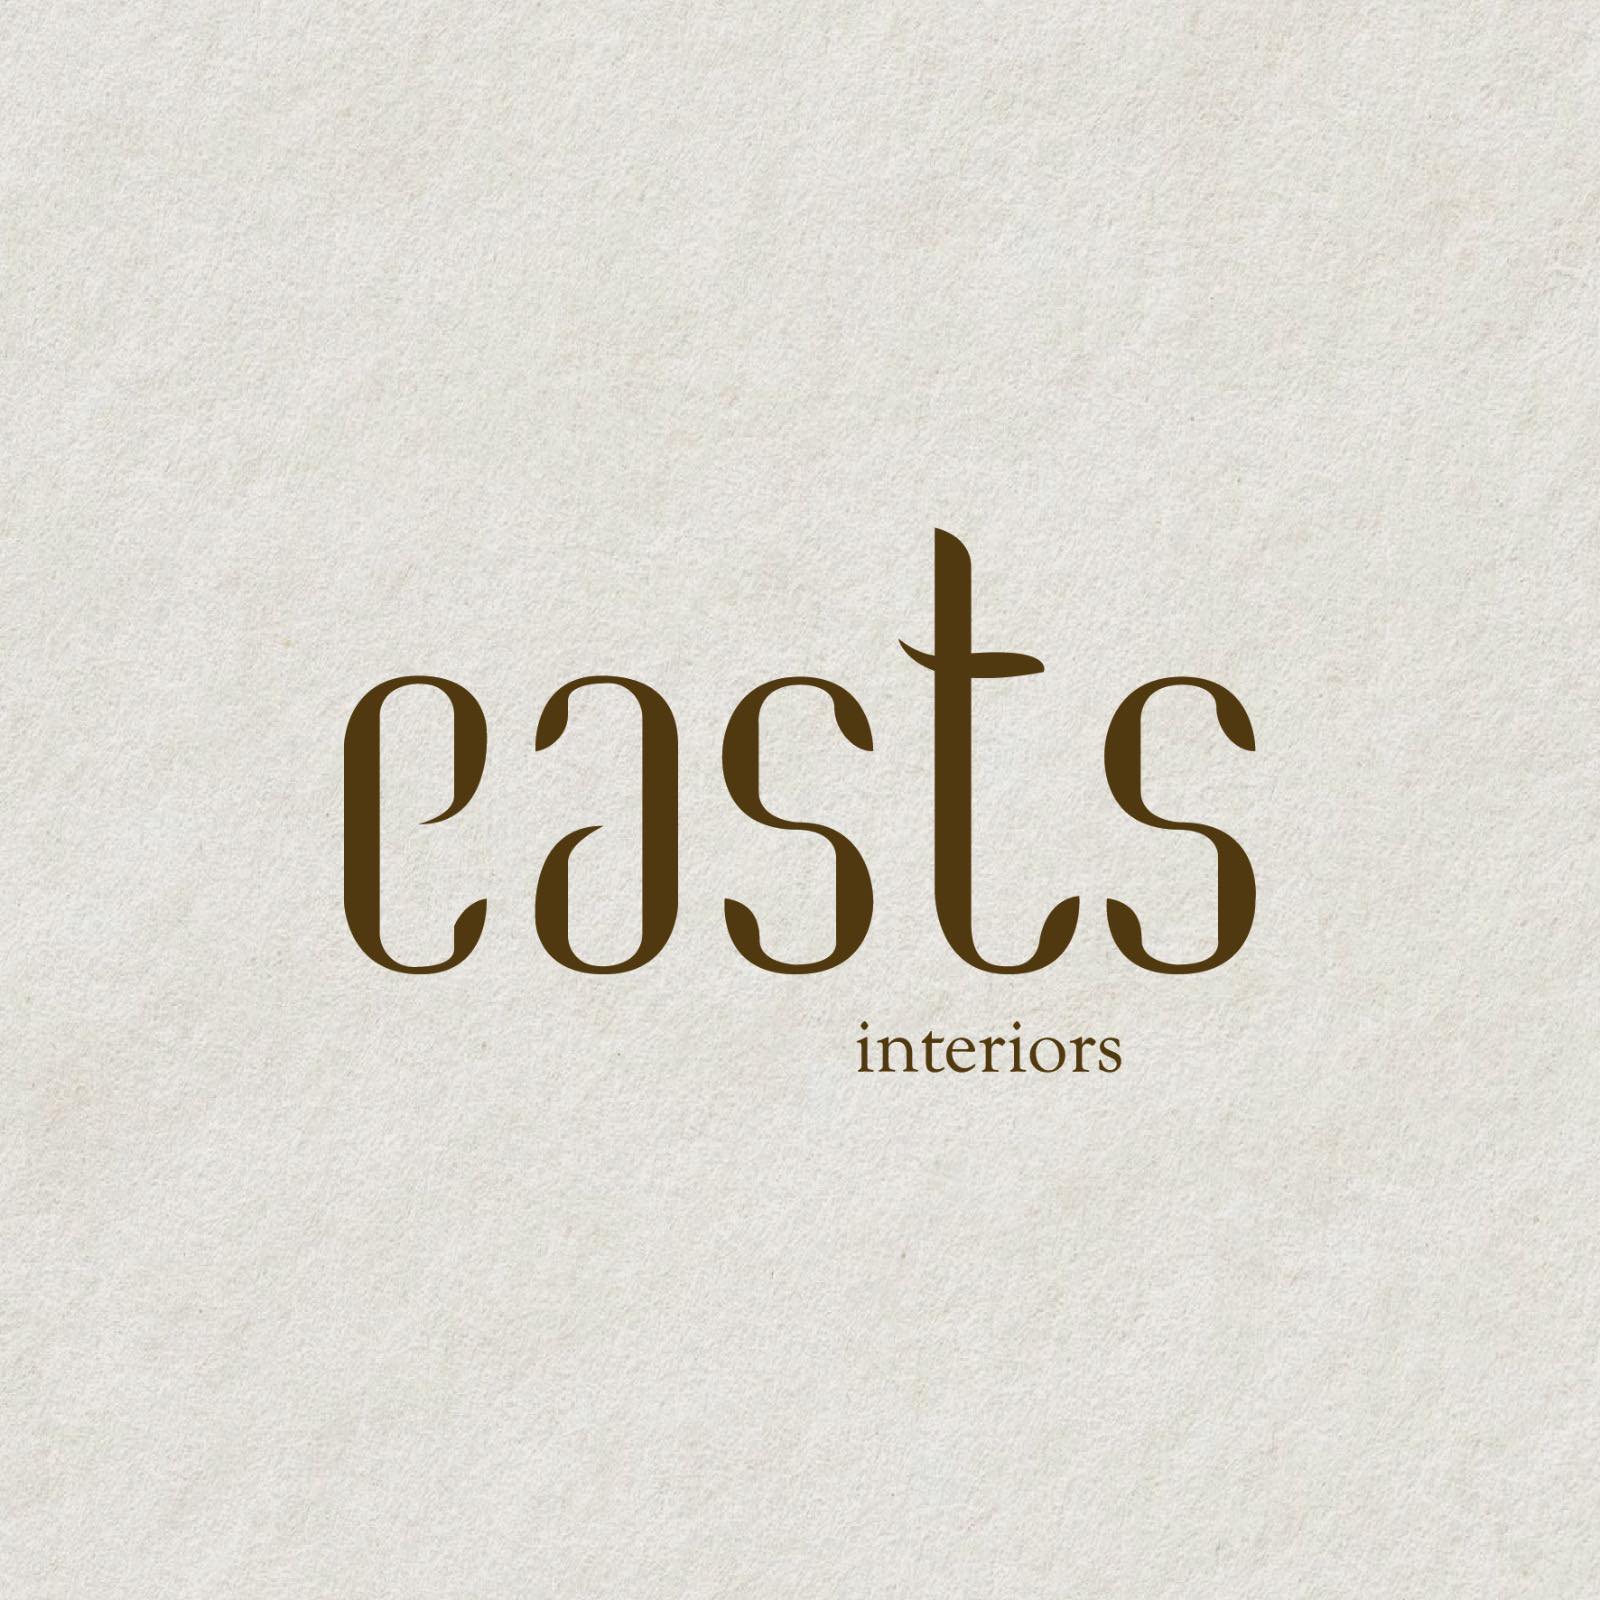 easts interiors